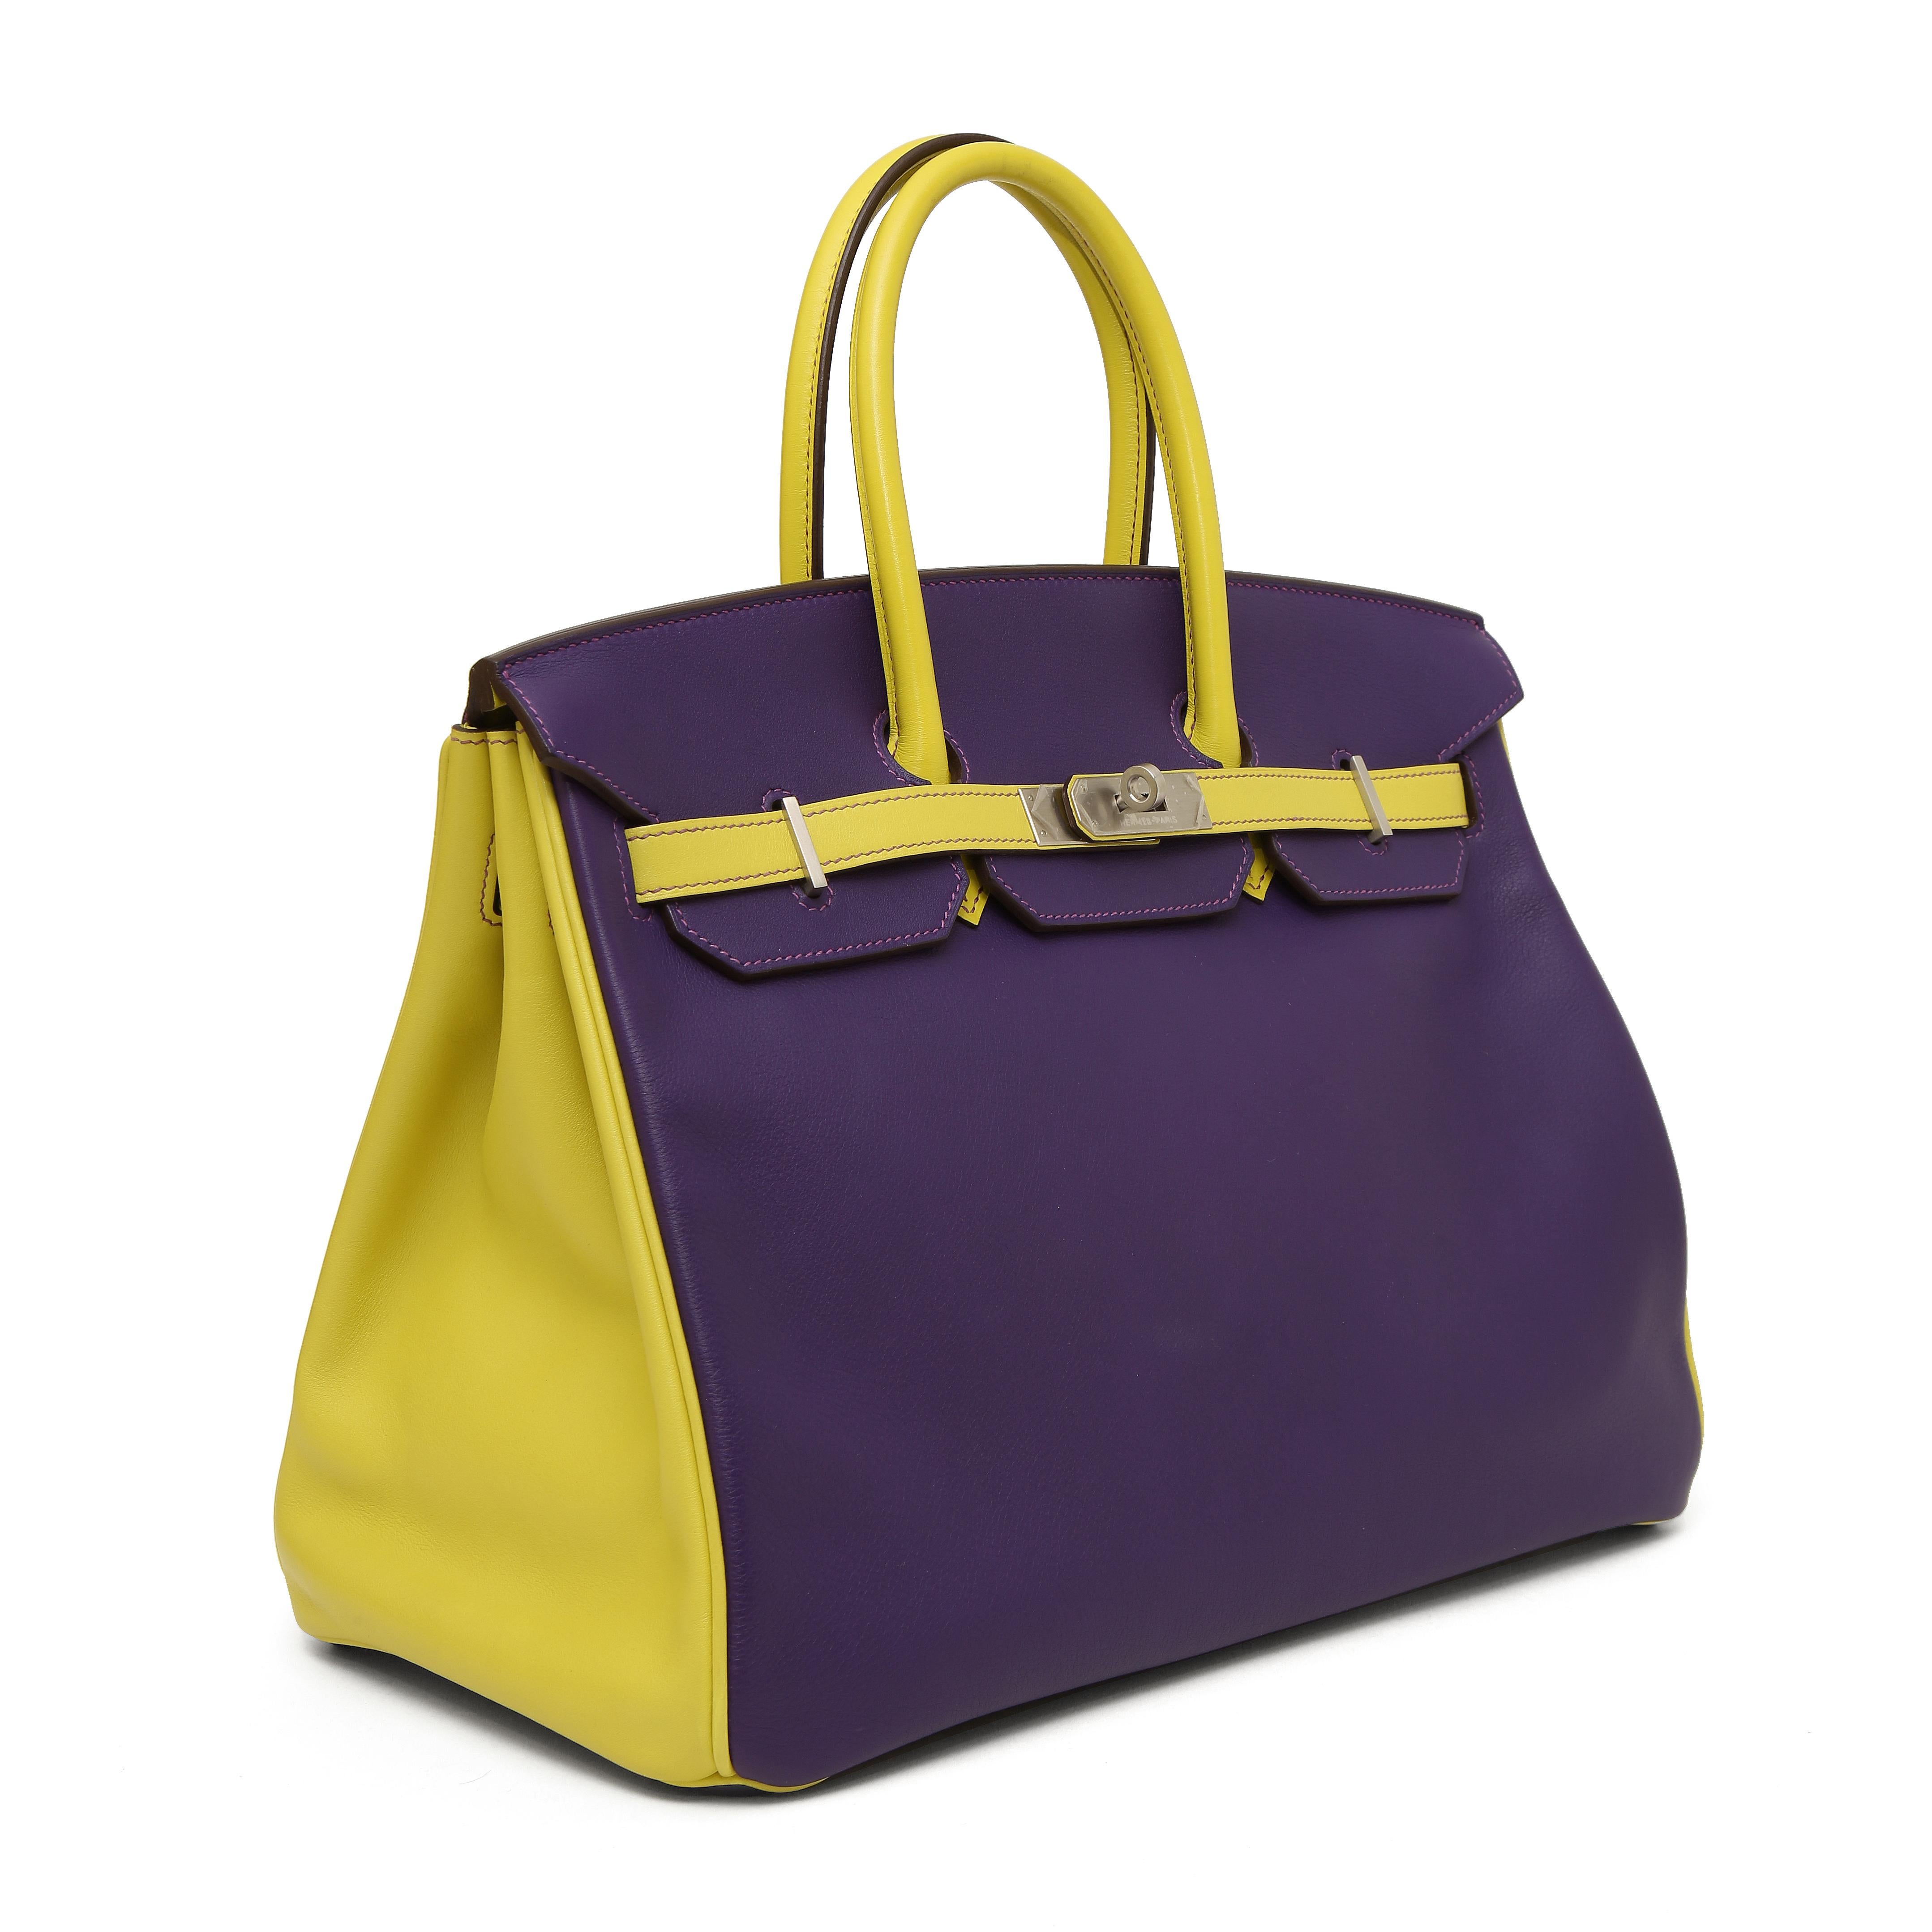 Hermès Birkin 35 ultra violet yellow lime
Measurements:
Width: 35 cm
Height: 25 cm
Depth: 18 cm
Stamp : P 
no defects 
No box, no invoice
Packaging: Dustbag 